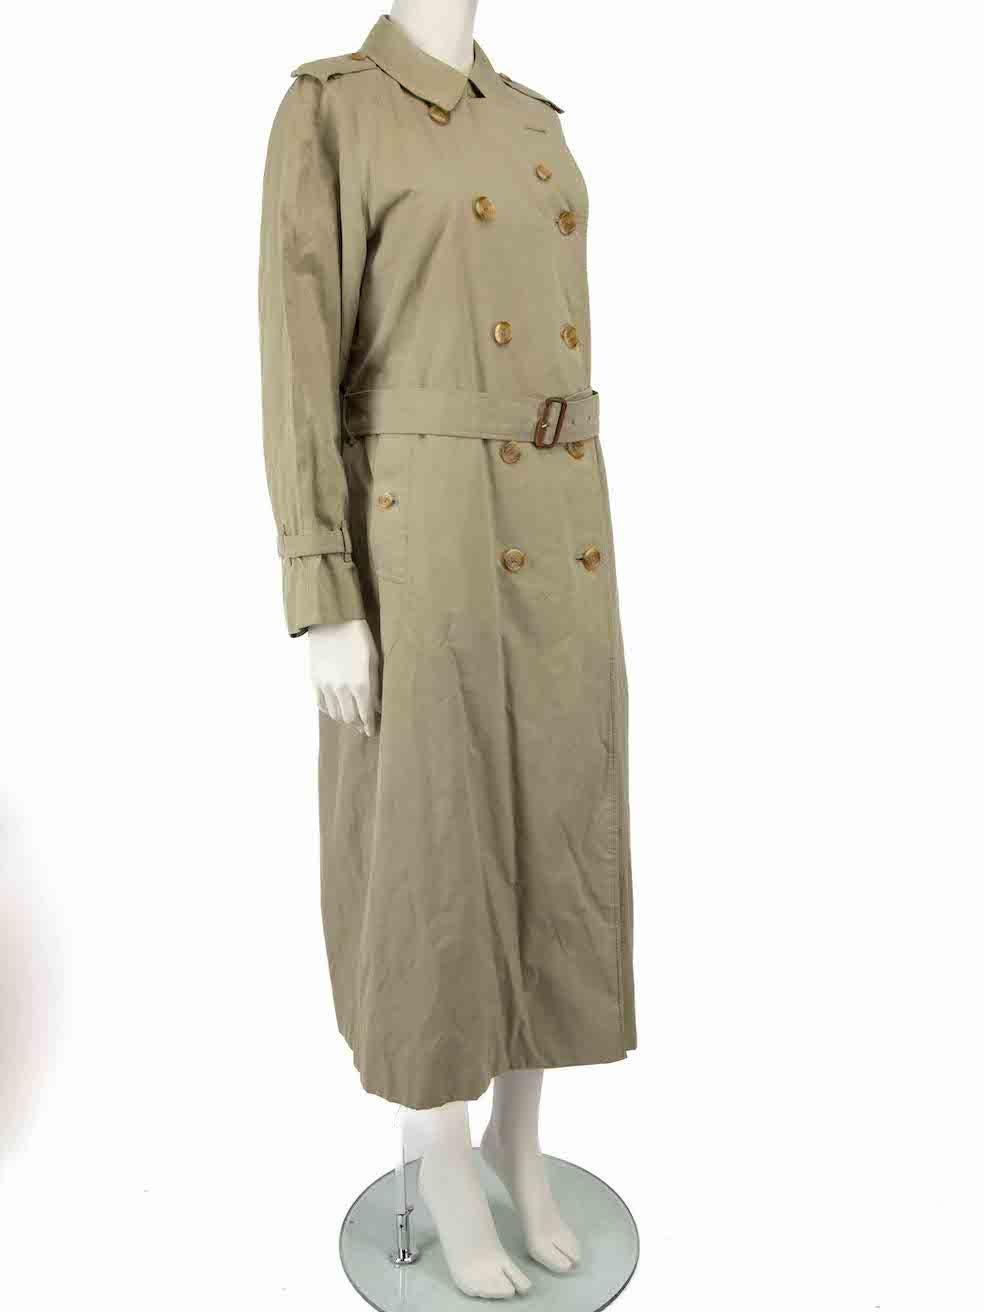 CONDITION is Good. General wear to coat is evident. Moderate signs of wear to the front, back and sleeves with marks across the piece on this used Burberry's designer resale item.
 
 
 
 Details
 
 
 Vintage
 
 Khaki
 
 Cotton
 
 Trench coat
 
 Long